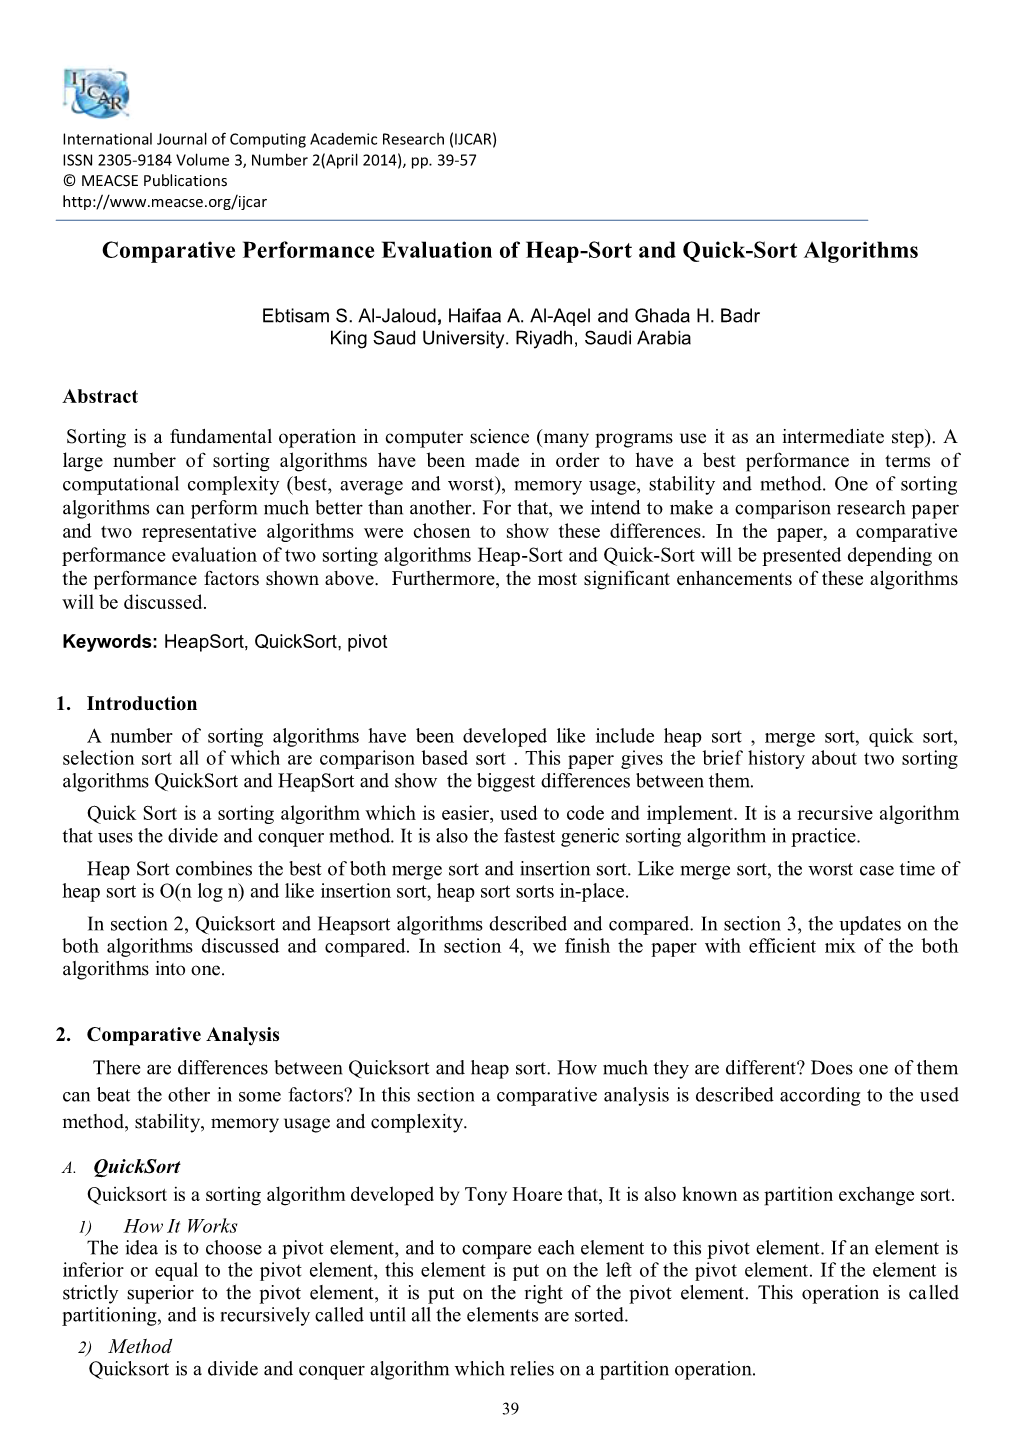 Comparative Performance Evaluation of Heap-Sort and Quick-Sort Algorithms